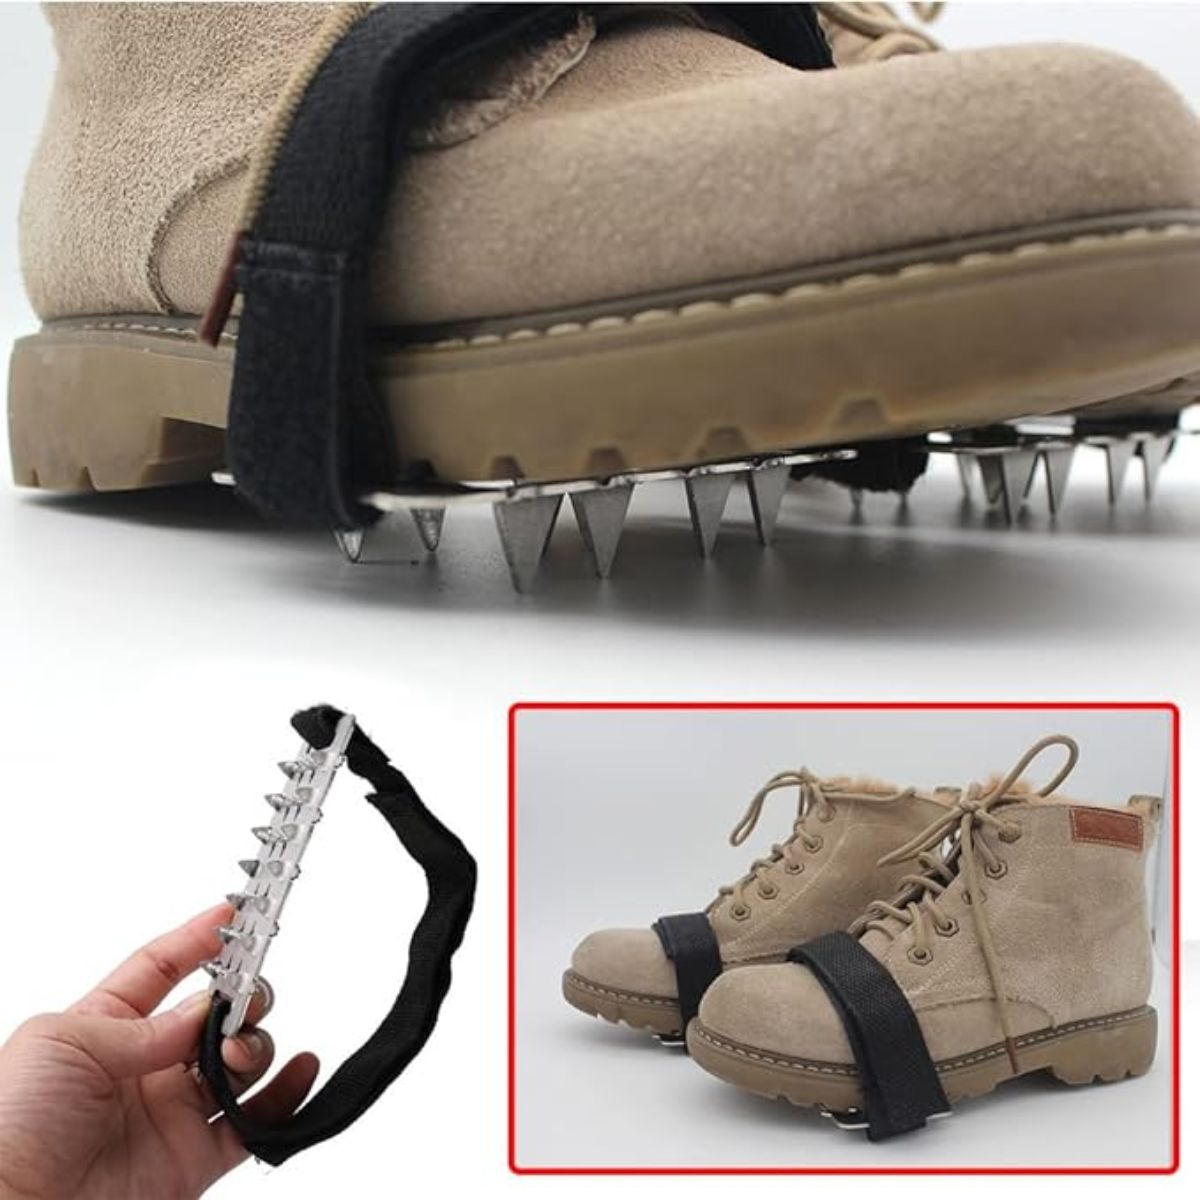 Pocket Crampons/Shoe Grip with 26 Spikes for Ice/Snow 2